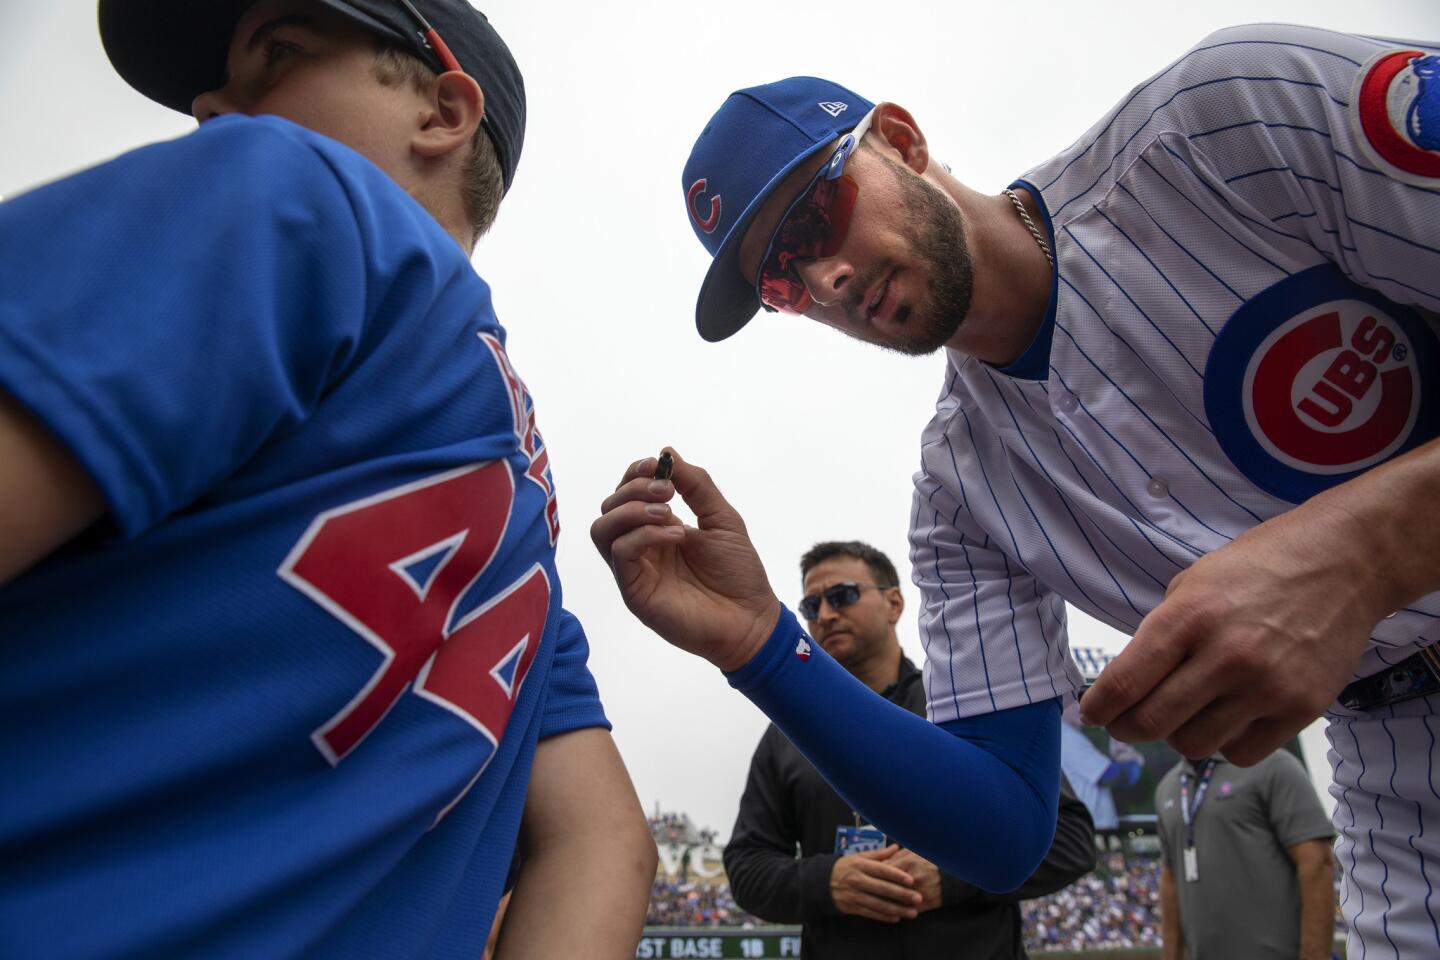 Cubs third baseman Kris Bryant signs autographs before playing the Dodgers on Wednesday, June 20, 2018, at Wrigley Field.